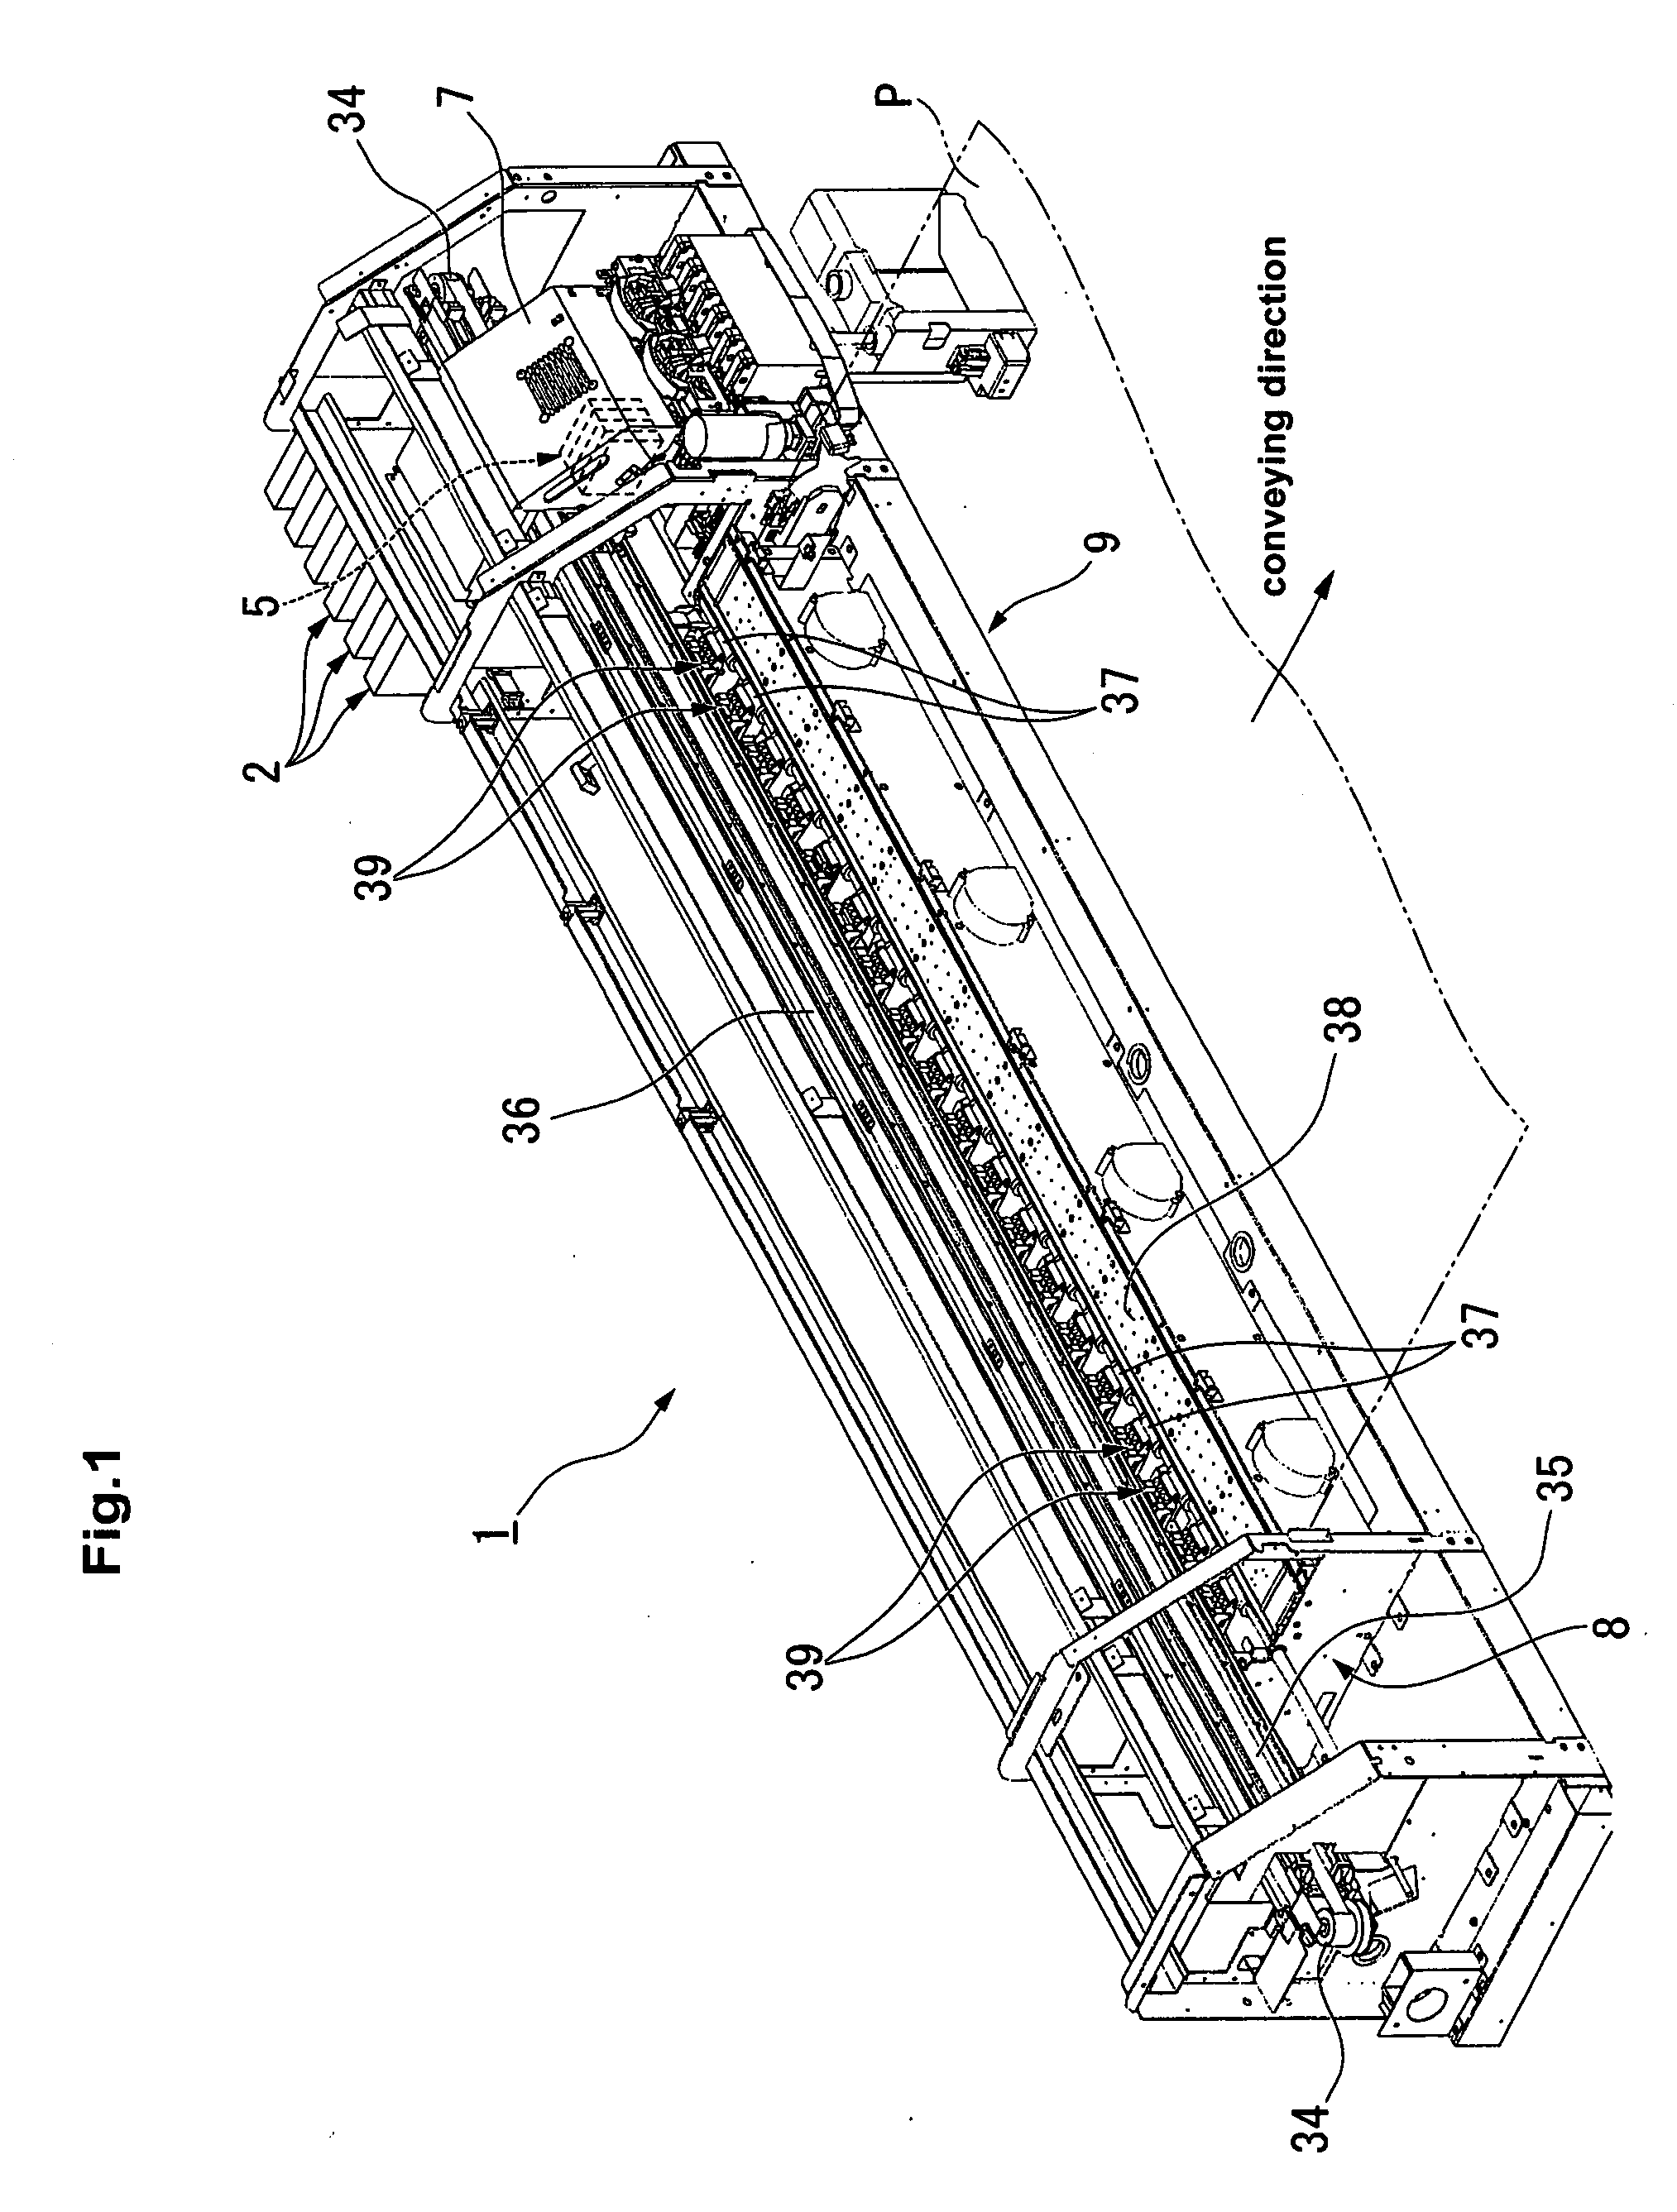 Ink cartridge and recording apparatus